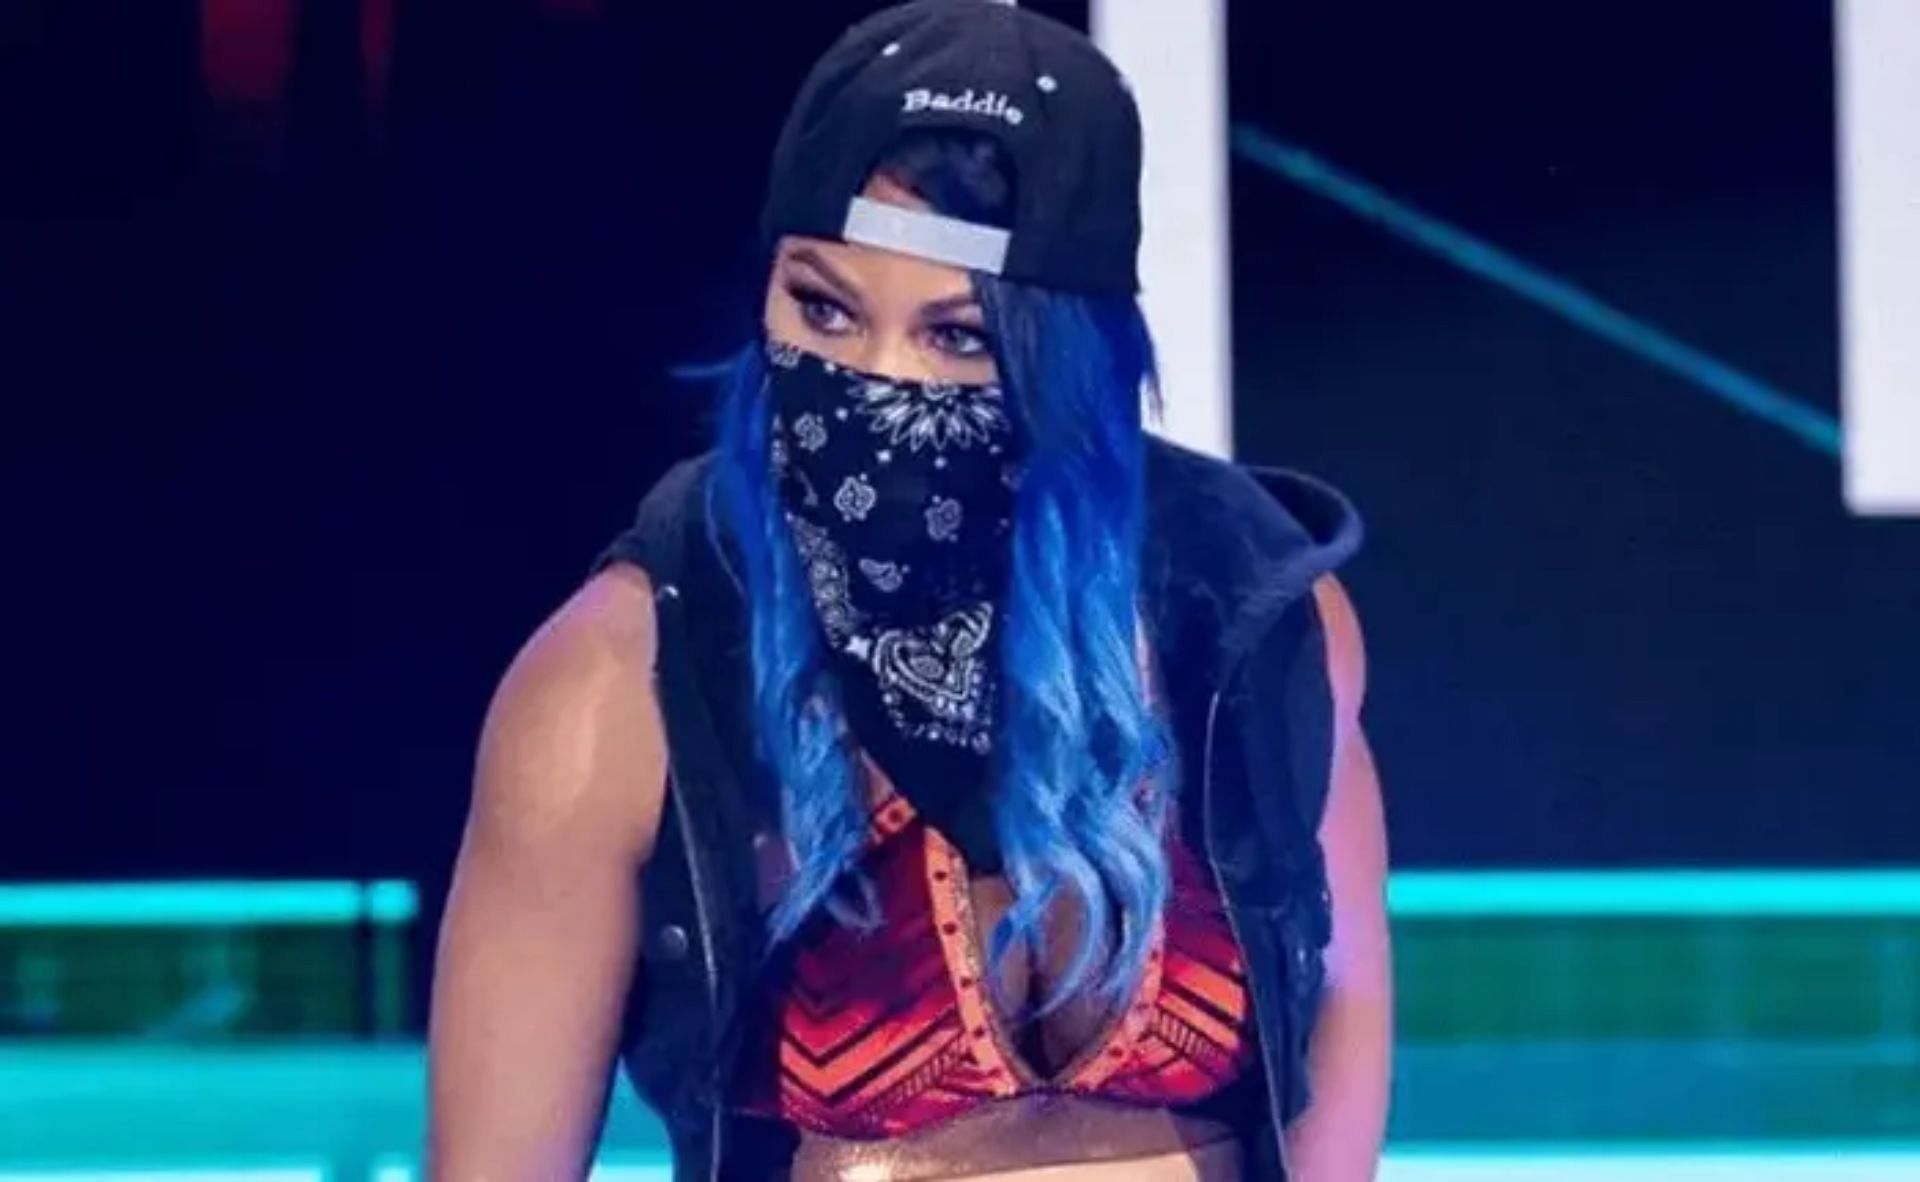 Mia Yim wearing a bandana mask during one of her entrances